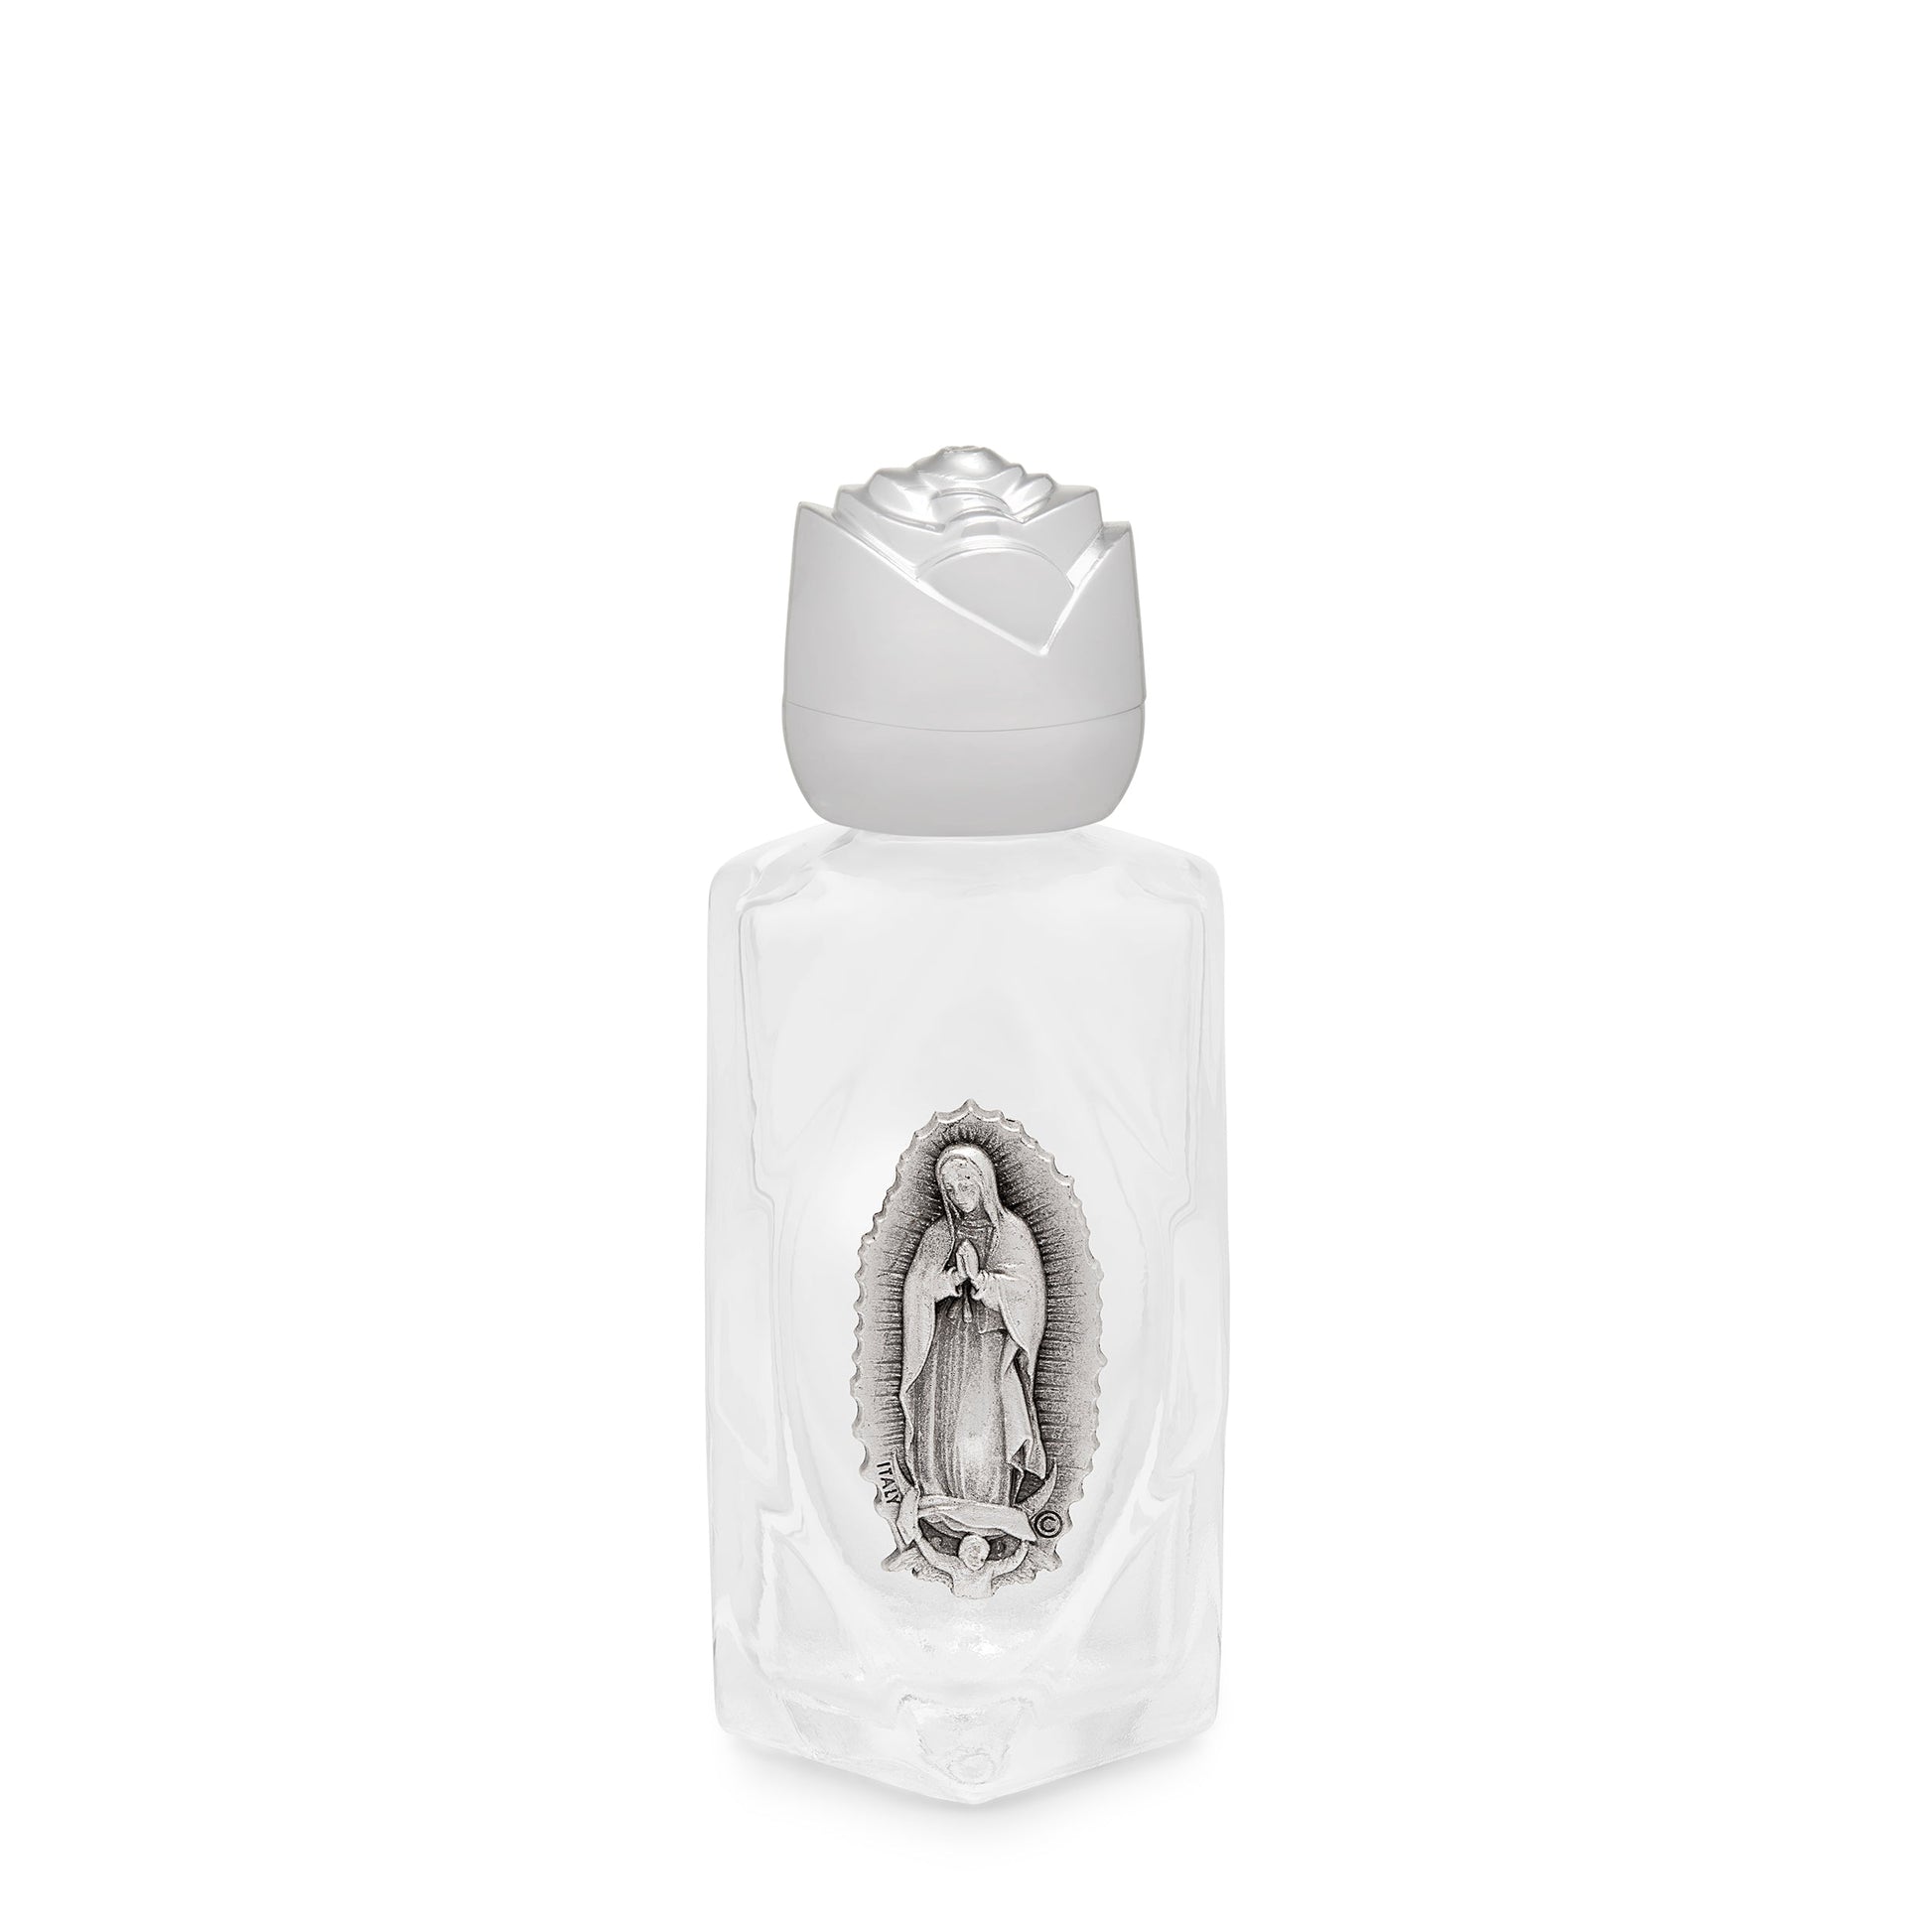 MONDO CATTOLICO Bottle of 10 ml. with Our Lady of Guadalupe